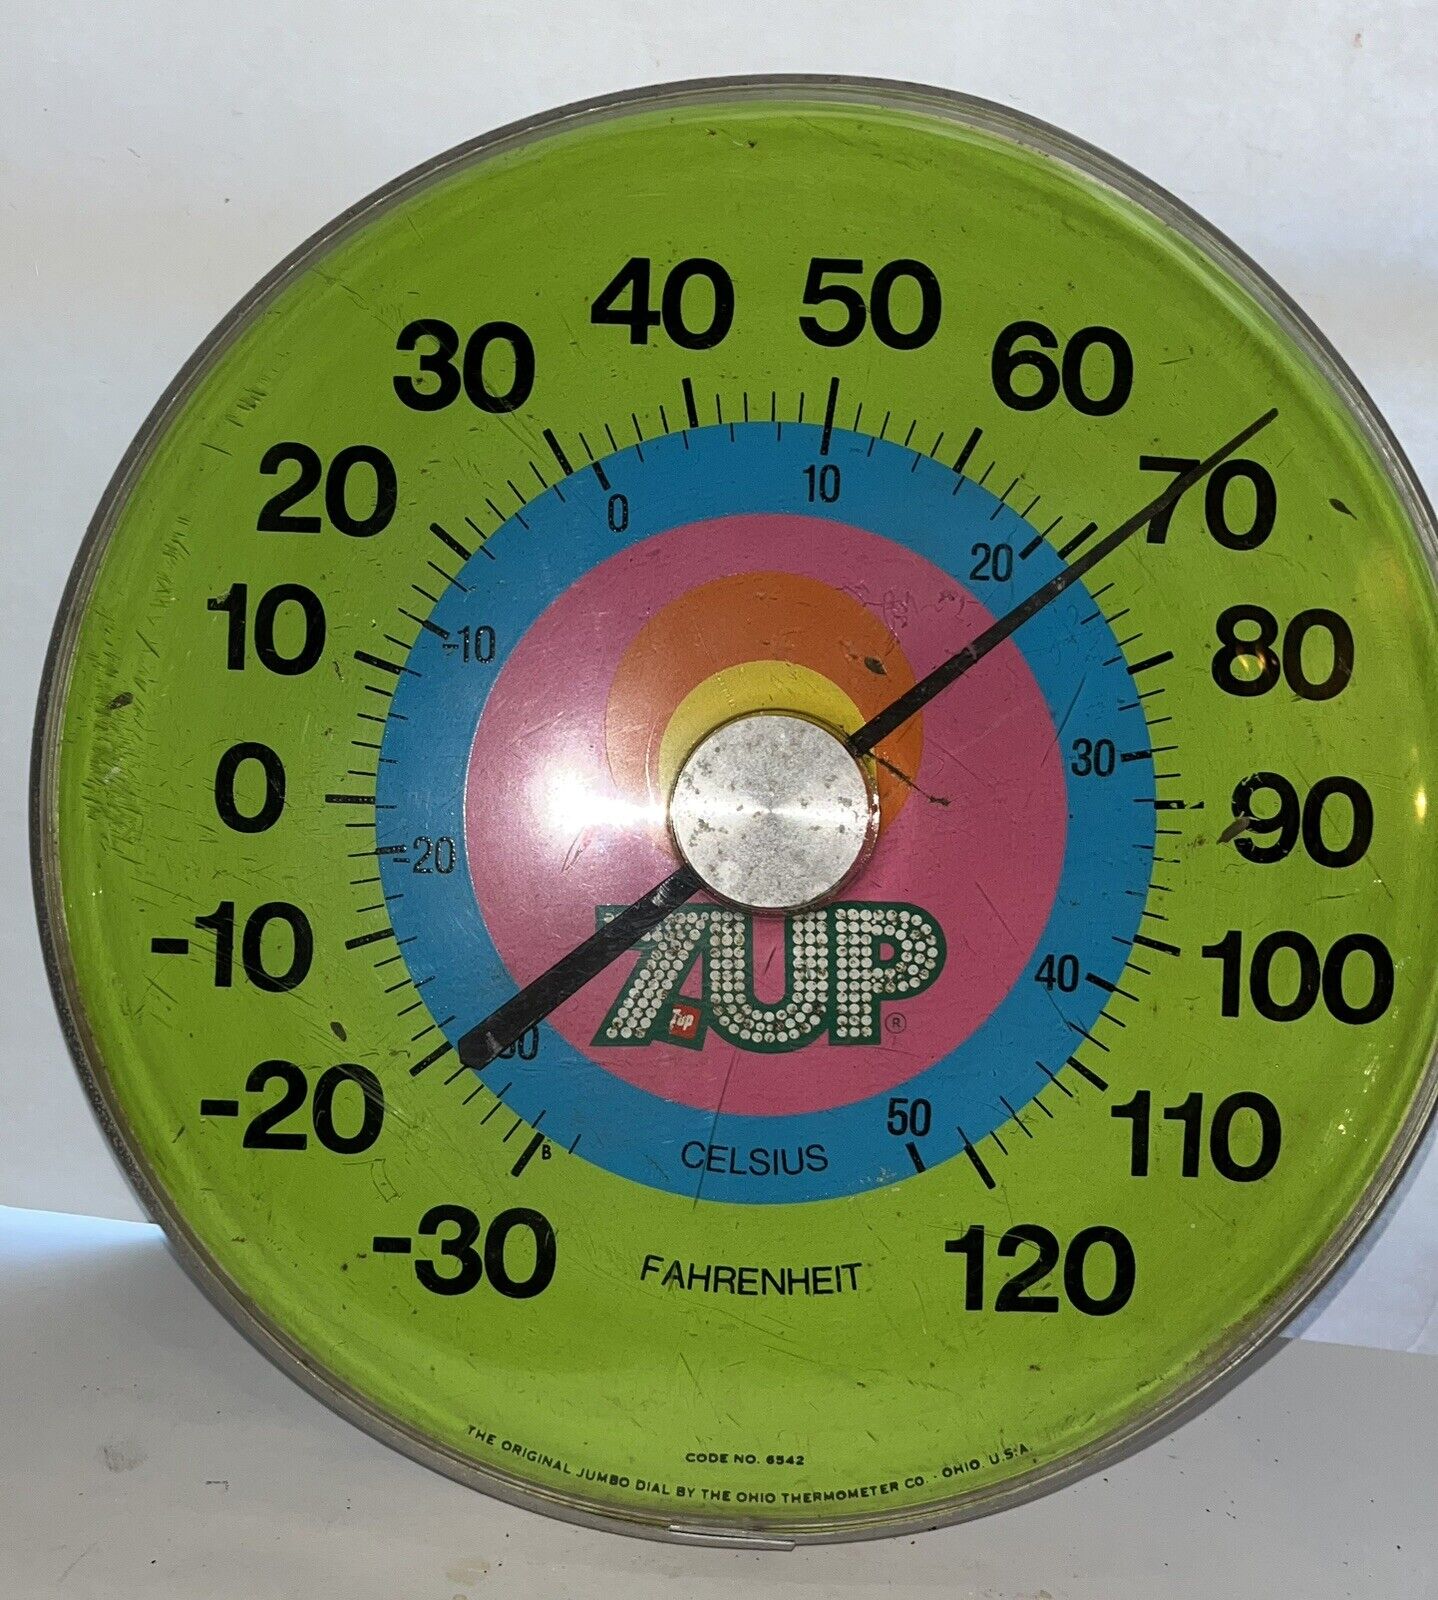 1970's Vintage 7UP Metal Thermometer JUMBO DIAL Soda Advertising